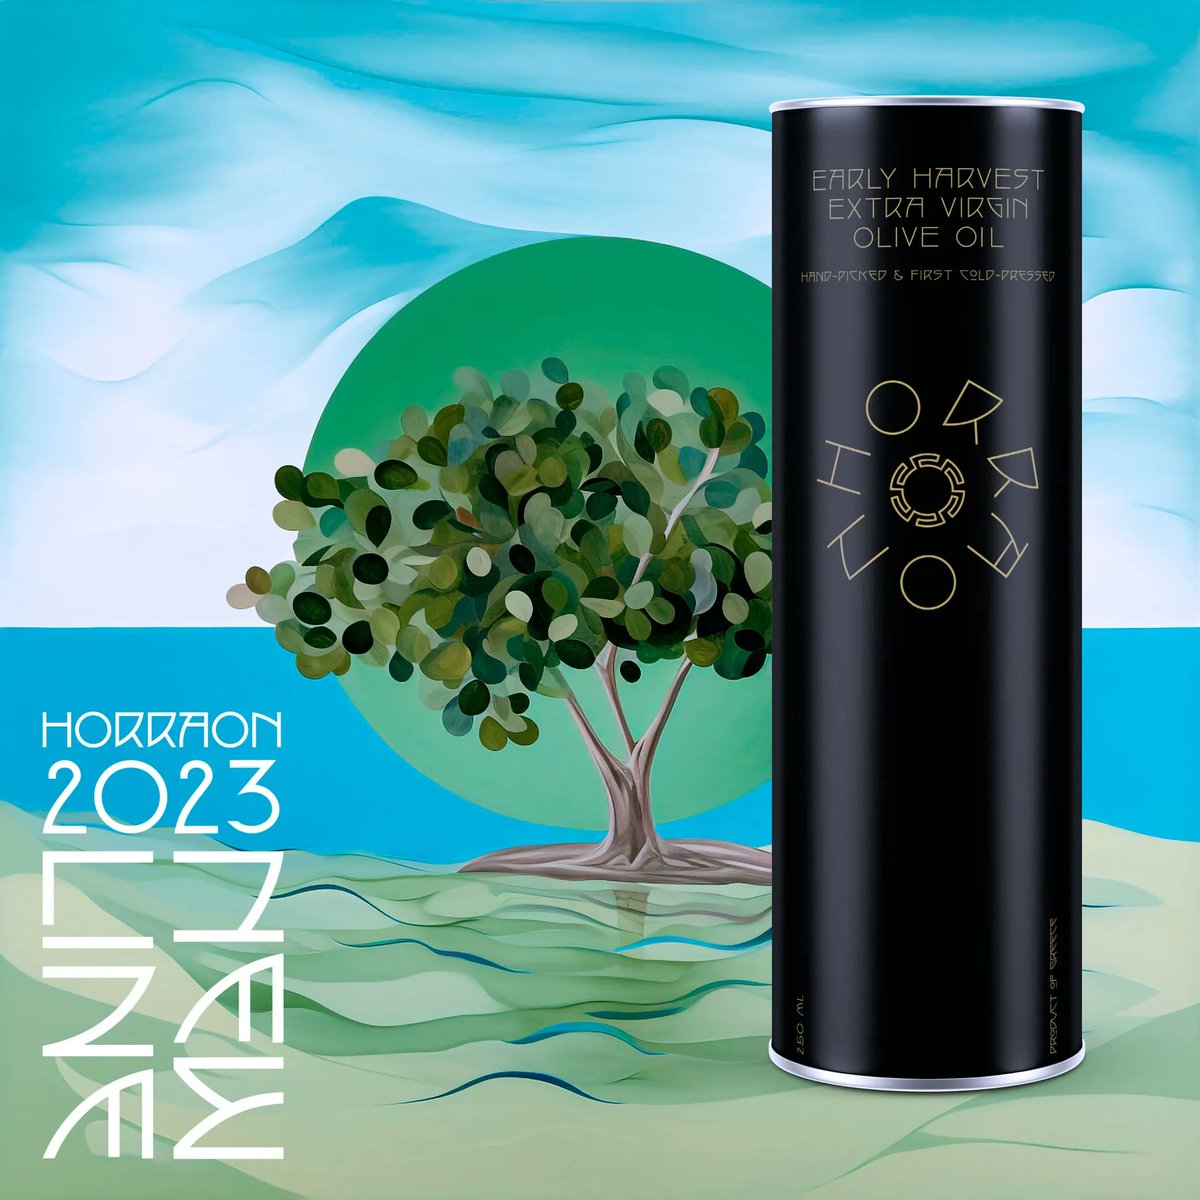 Elevate your cooking experience with the exquisite flavors of HORRAON EVOO 2023. Pre-order your bottle today and unlock a world of culinary possibilities! #CookingExperience #PreOrderNow #HORRAONEVOO2023 

HORRAON EVOO 500ml buff.ly/3BLEAz2